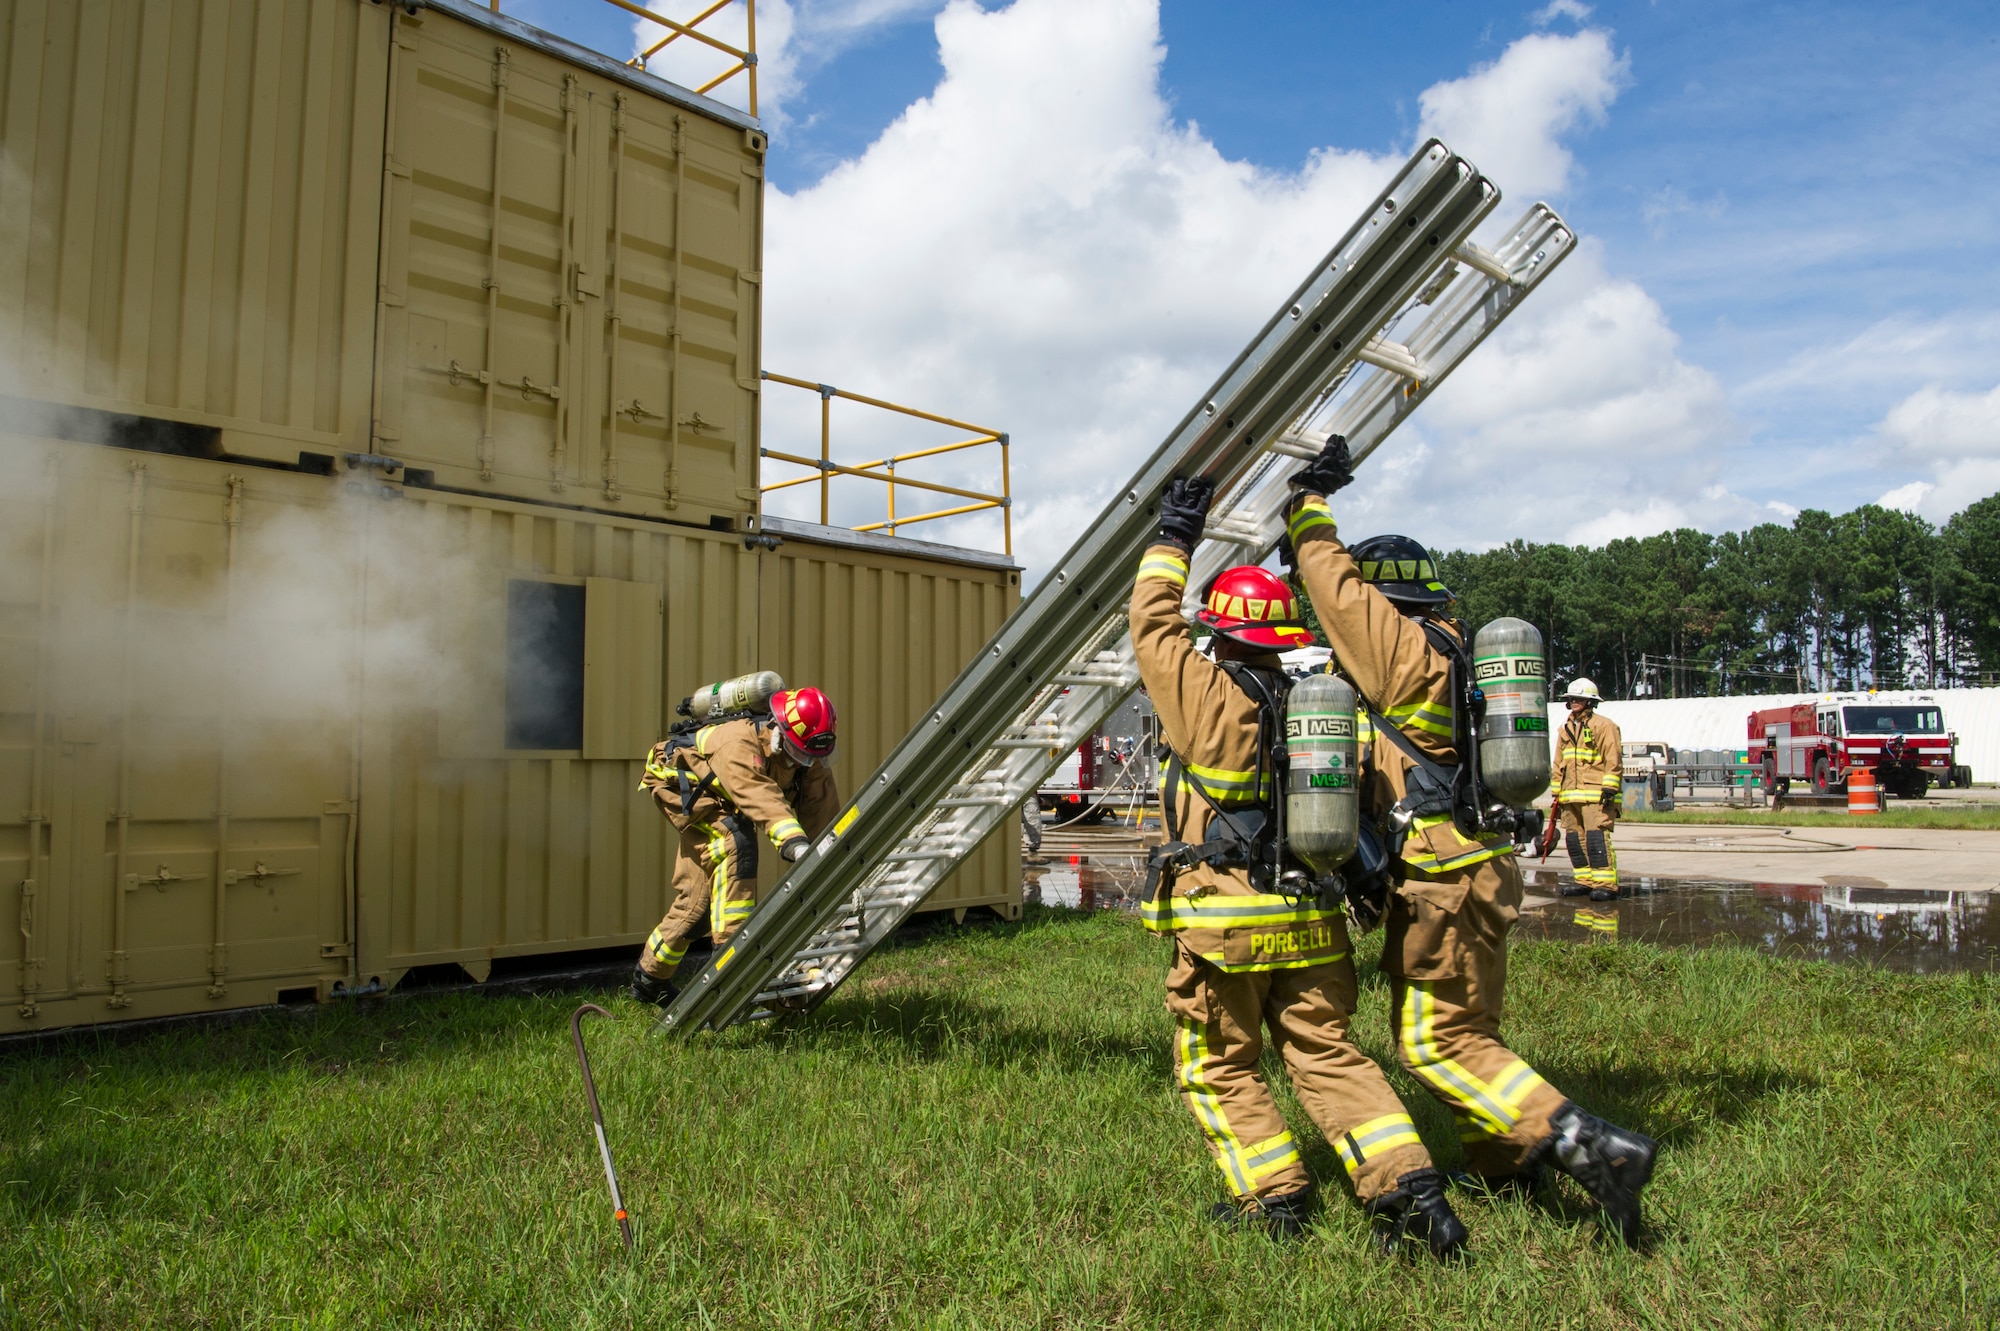 U.S. Air Force Staff Sgt. Jesse Porcelli with the 514th Civil Engineer Squadron from Joint Base McGuire-Dix-Lakehurst, New Jersey and Senior Airman Warren Duke with the 624th CES from Joint Base Pearl Harbor-Hickam, Hawaii, prepare a ladder to retrieve people trapped in a simulated three-story building fire as a part of Patriot Warrior 2018 at Dobbins Air Reserve Base, Georgia, Aug. 17, 2018. Patriot Warrior exercises provide realistic training to build the next generation of leaders to prepare for the fight today and tomorrow. (U.S. Air Force photo by Master Sgt. Theanne Herrmann)